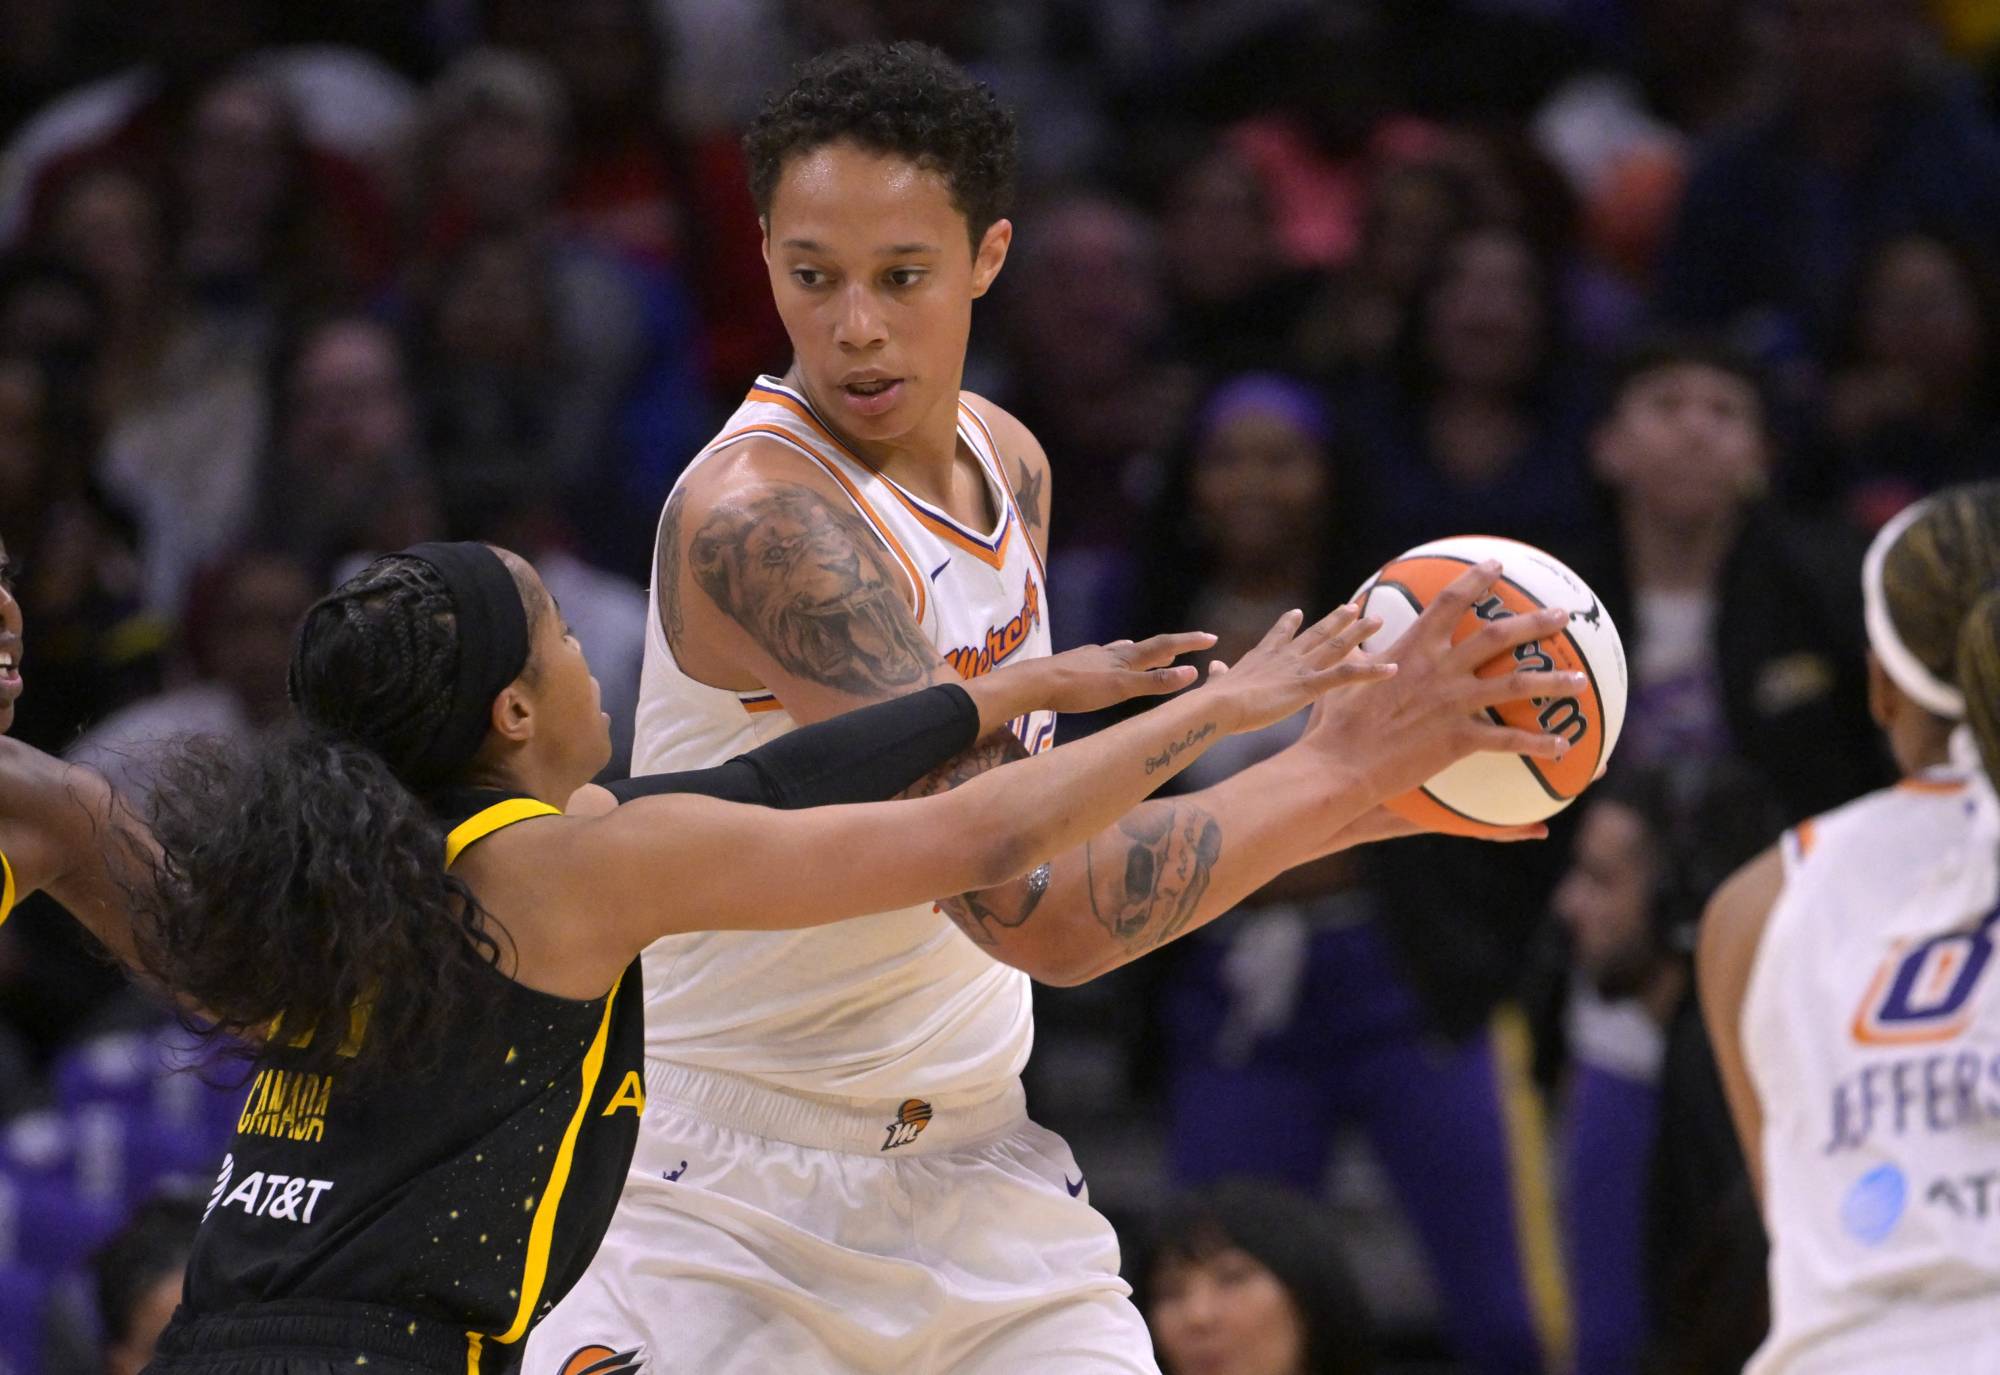 WNBA Star Brittney Griner detained in Russia as Mercury opens